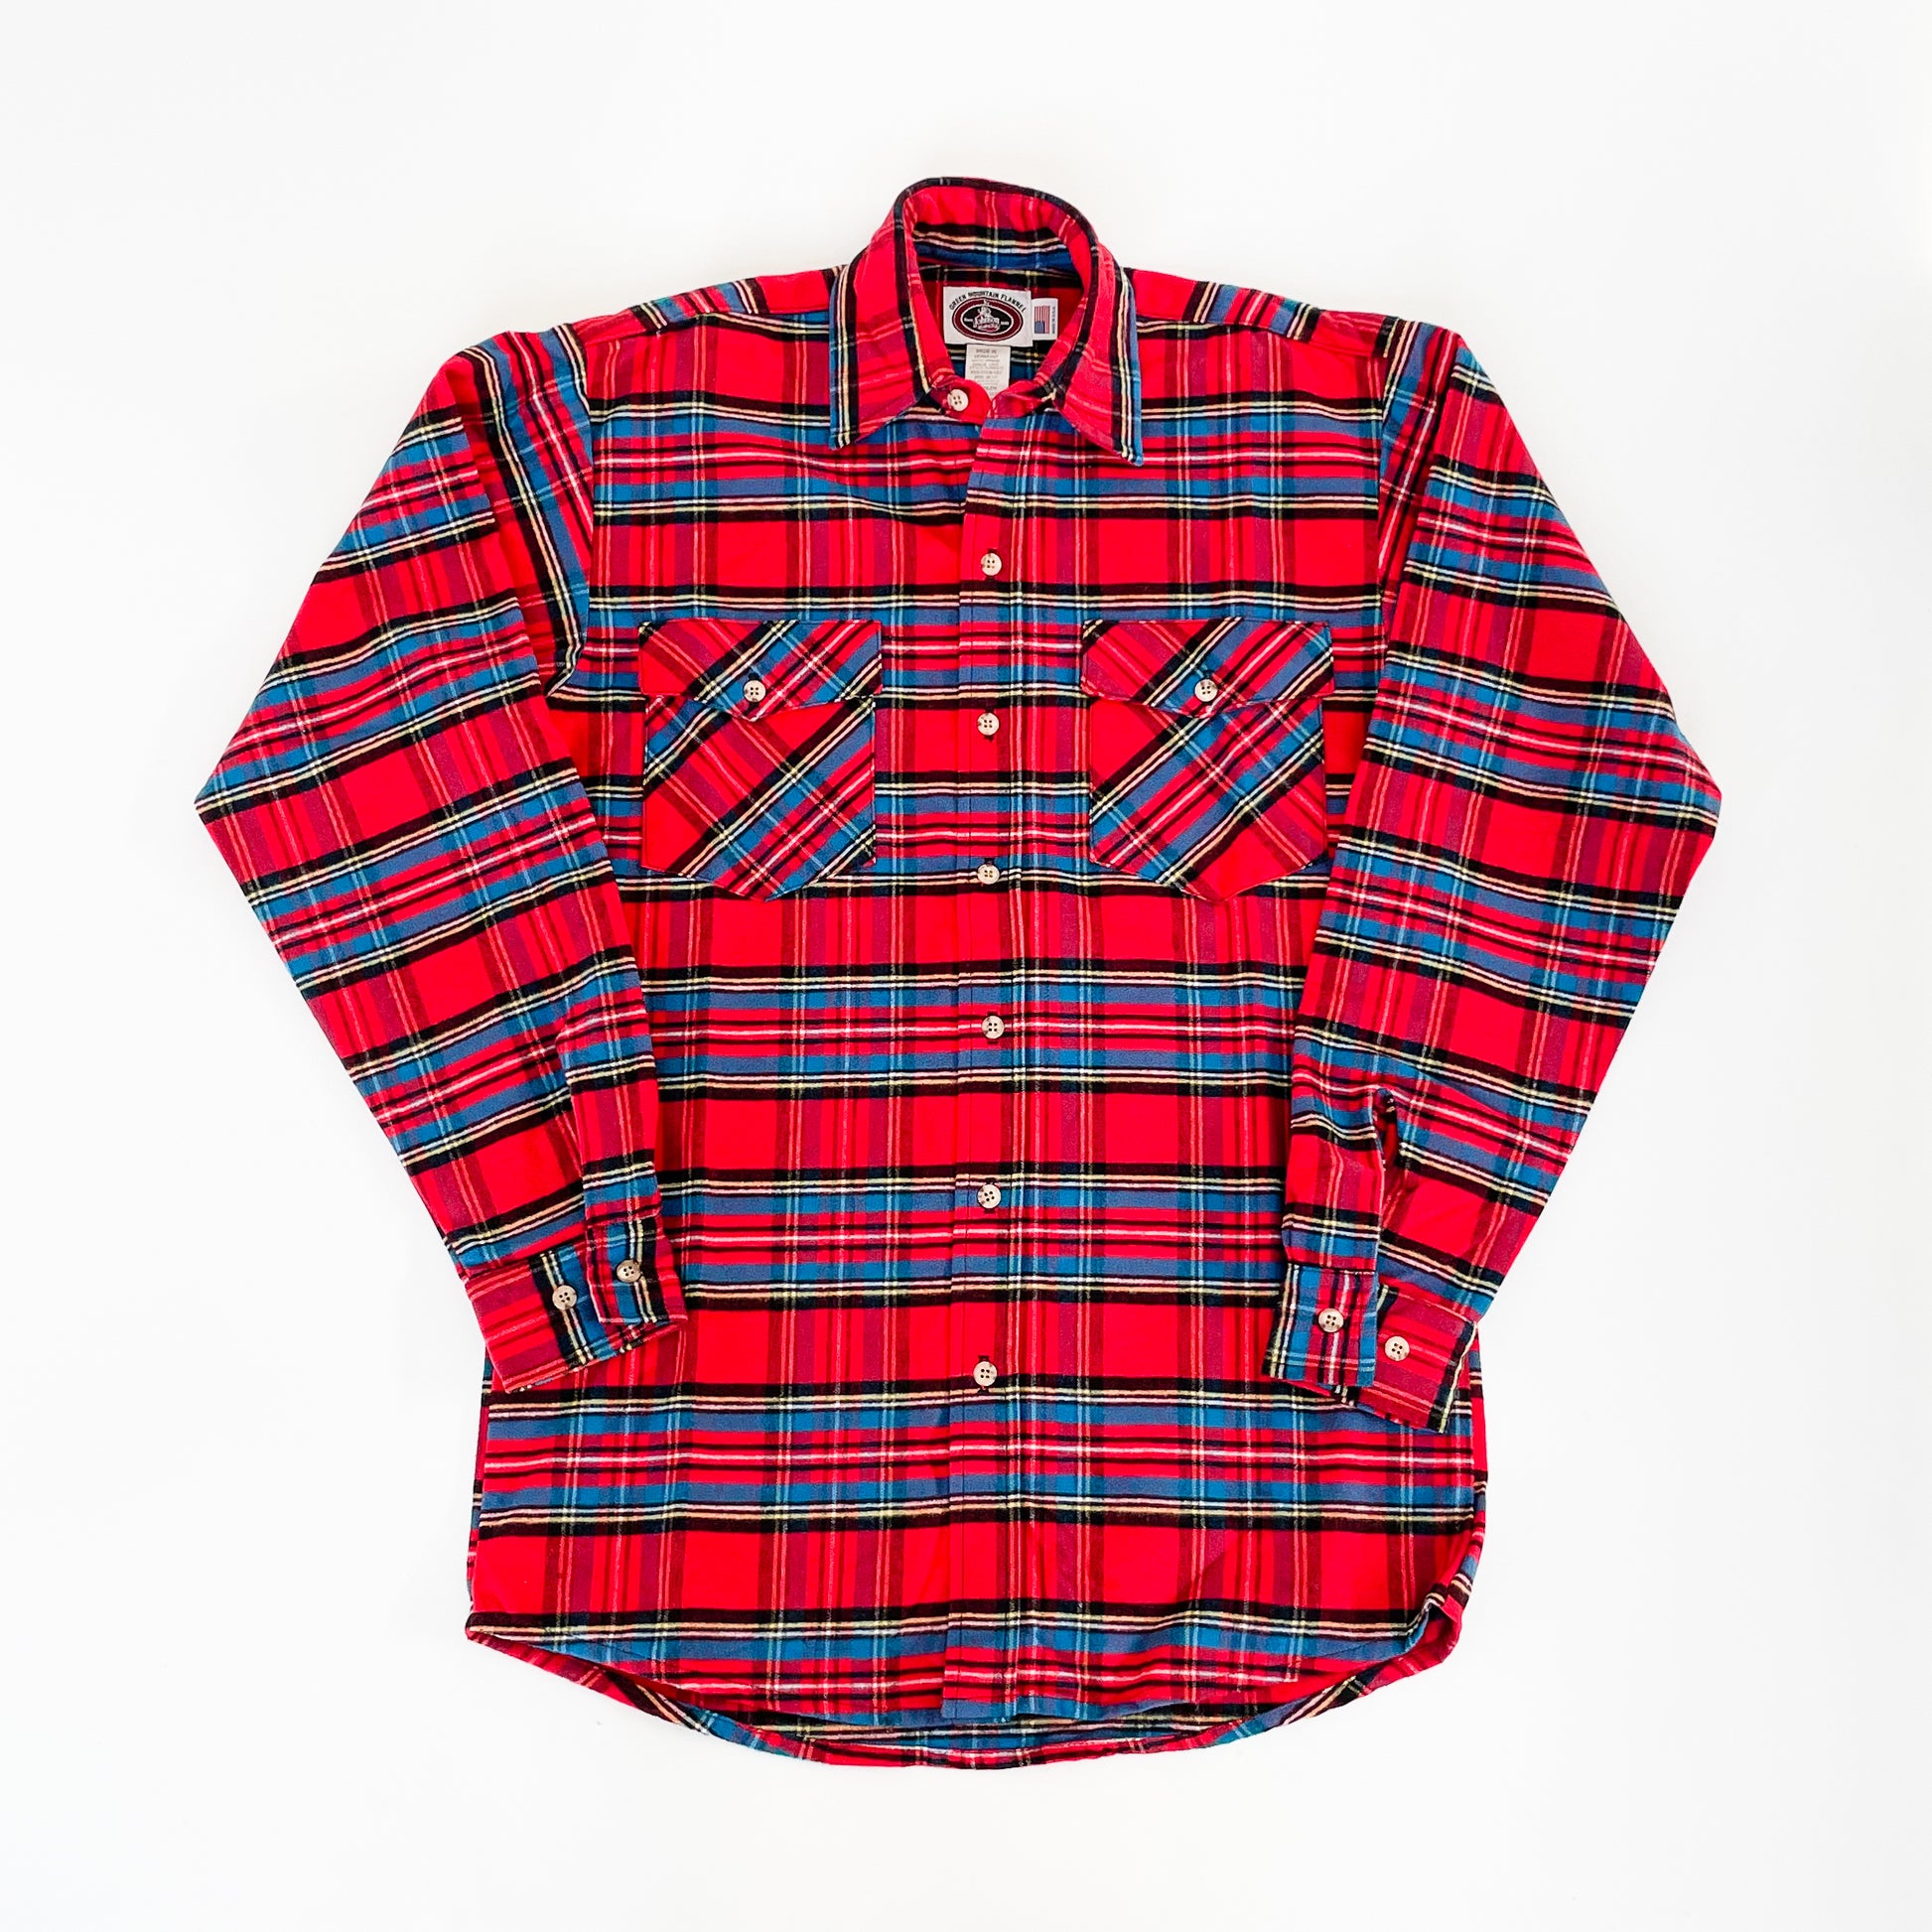 Green Mountain Flannel Men's Button long tail shirt, Red Stewart, red/pink/blue stripes front view